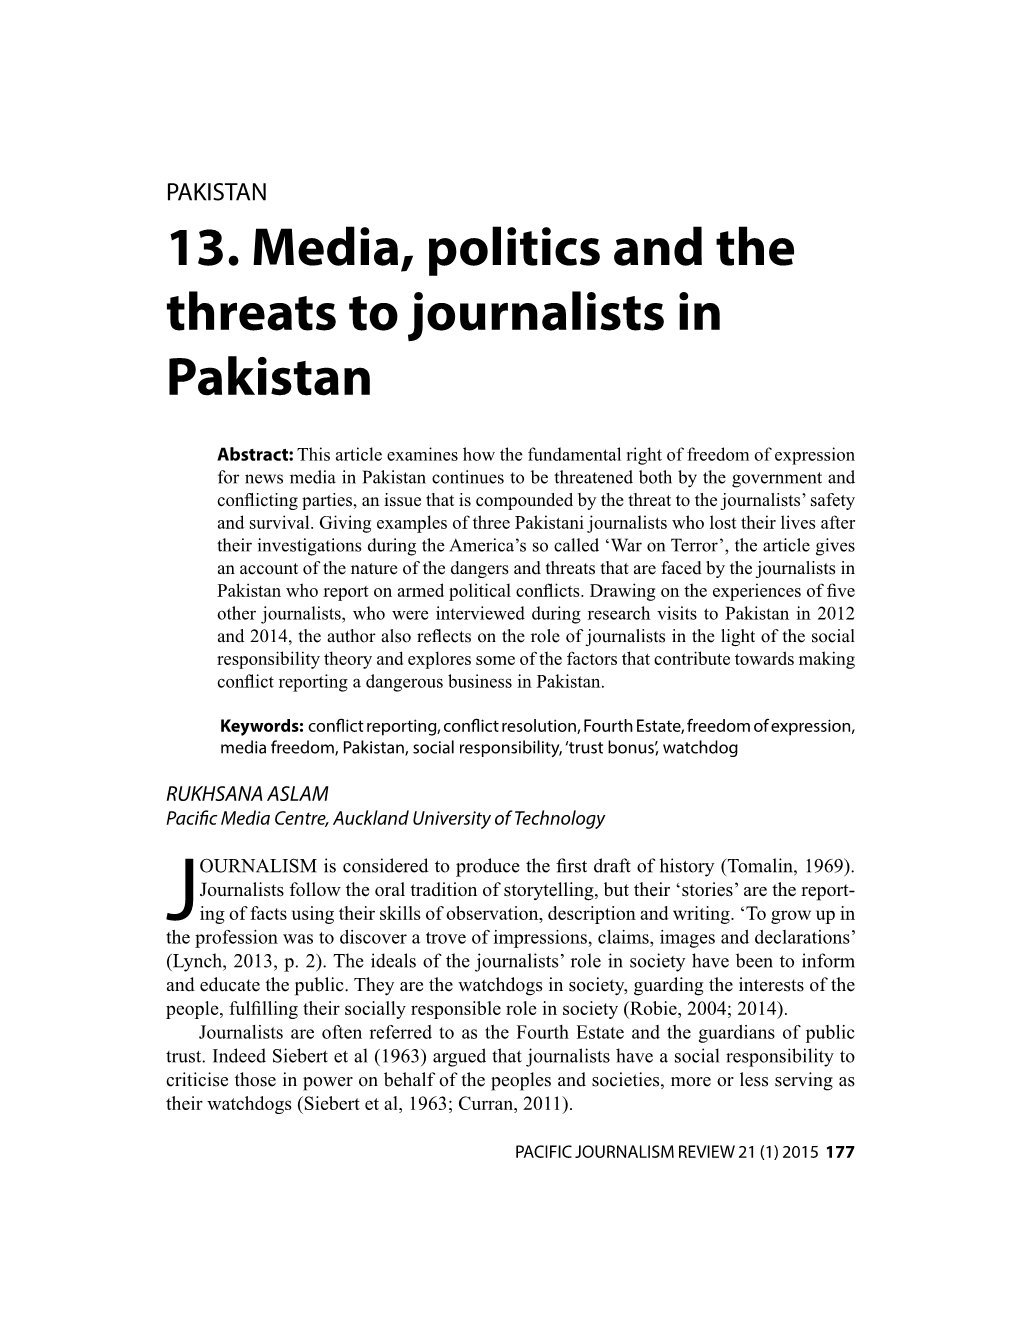 13. Media, Politics and the Threats to Journalists in Pakistan